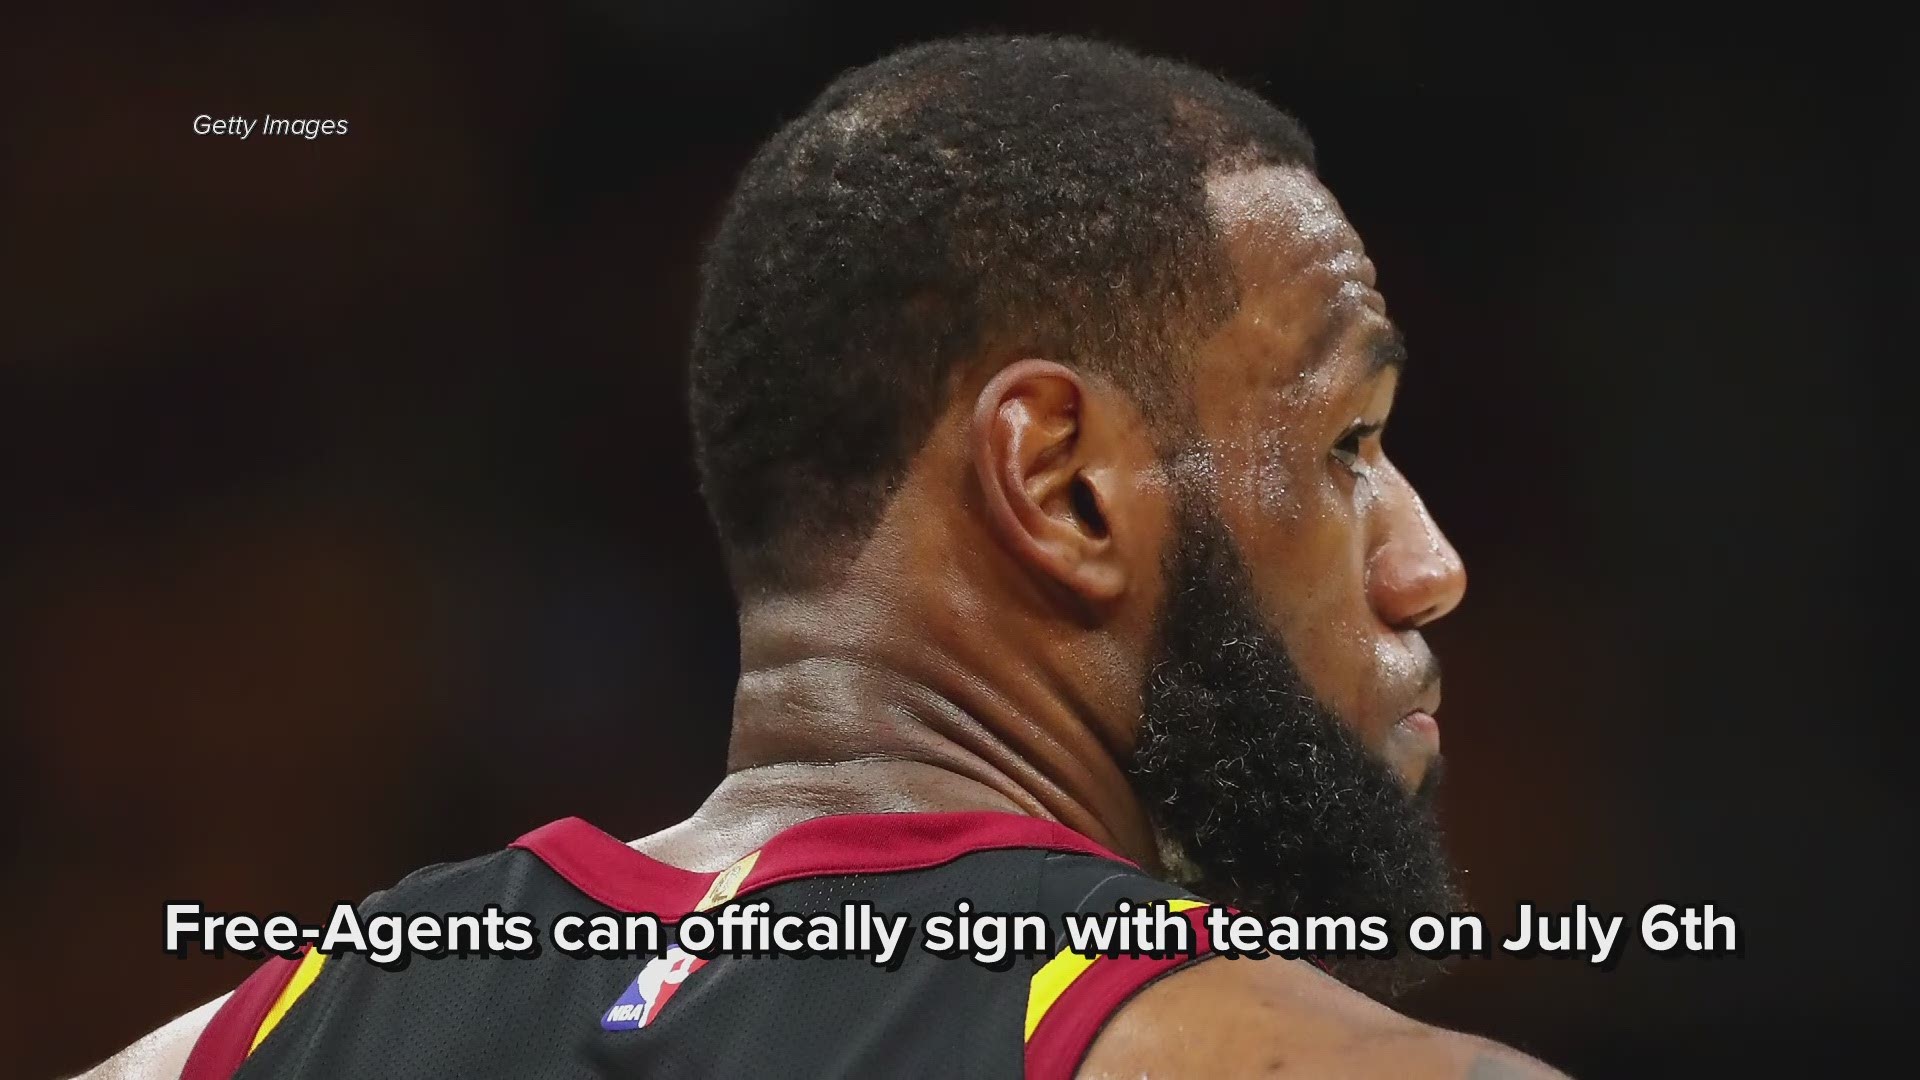 3 reasons why LeBron James could stay with the Cleveland Cavaliers